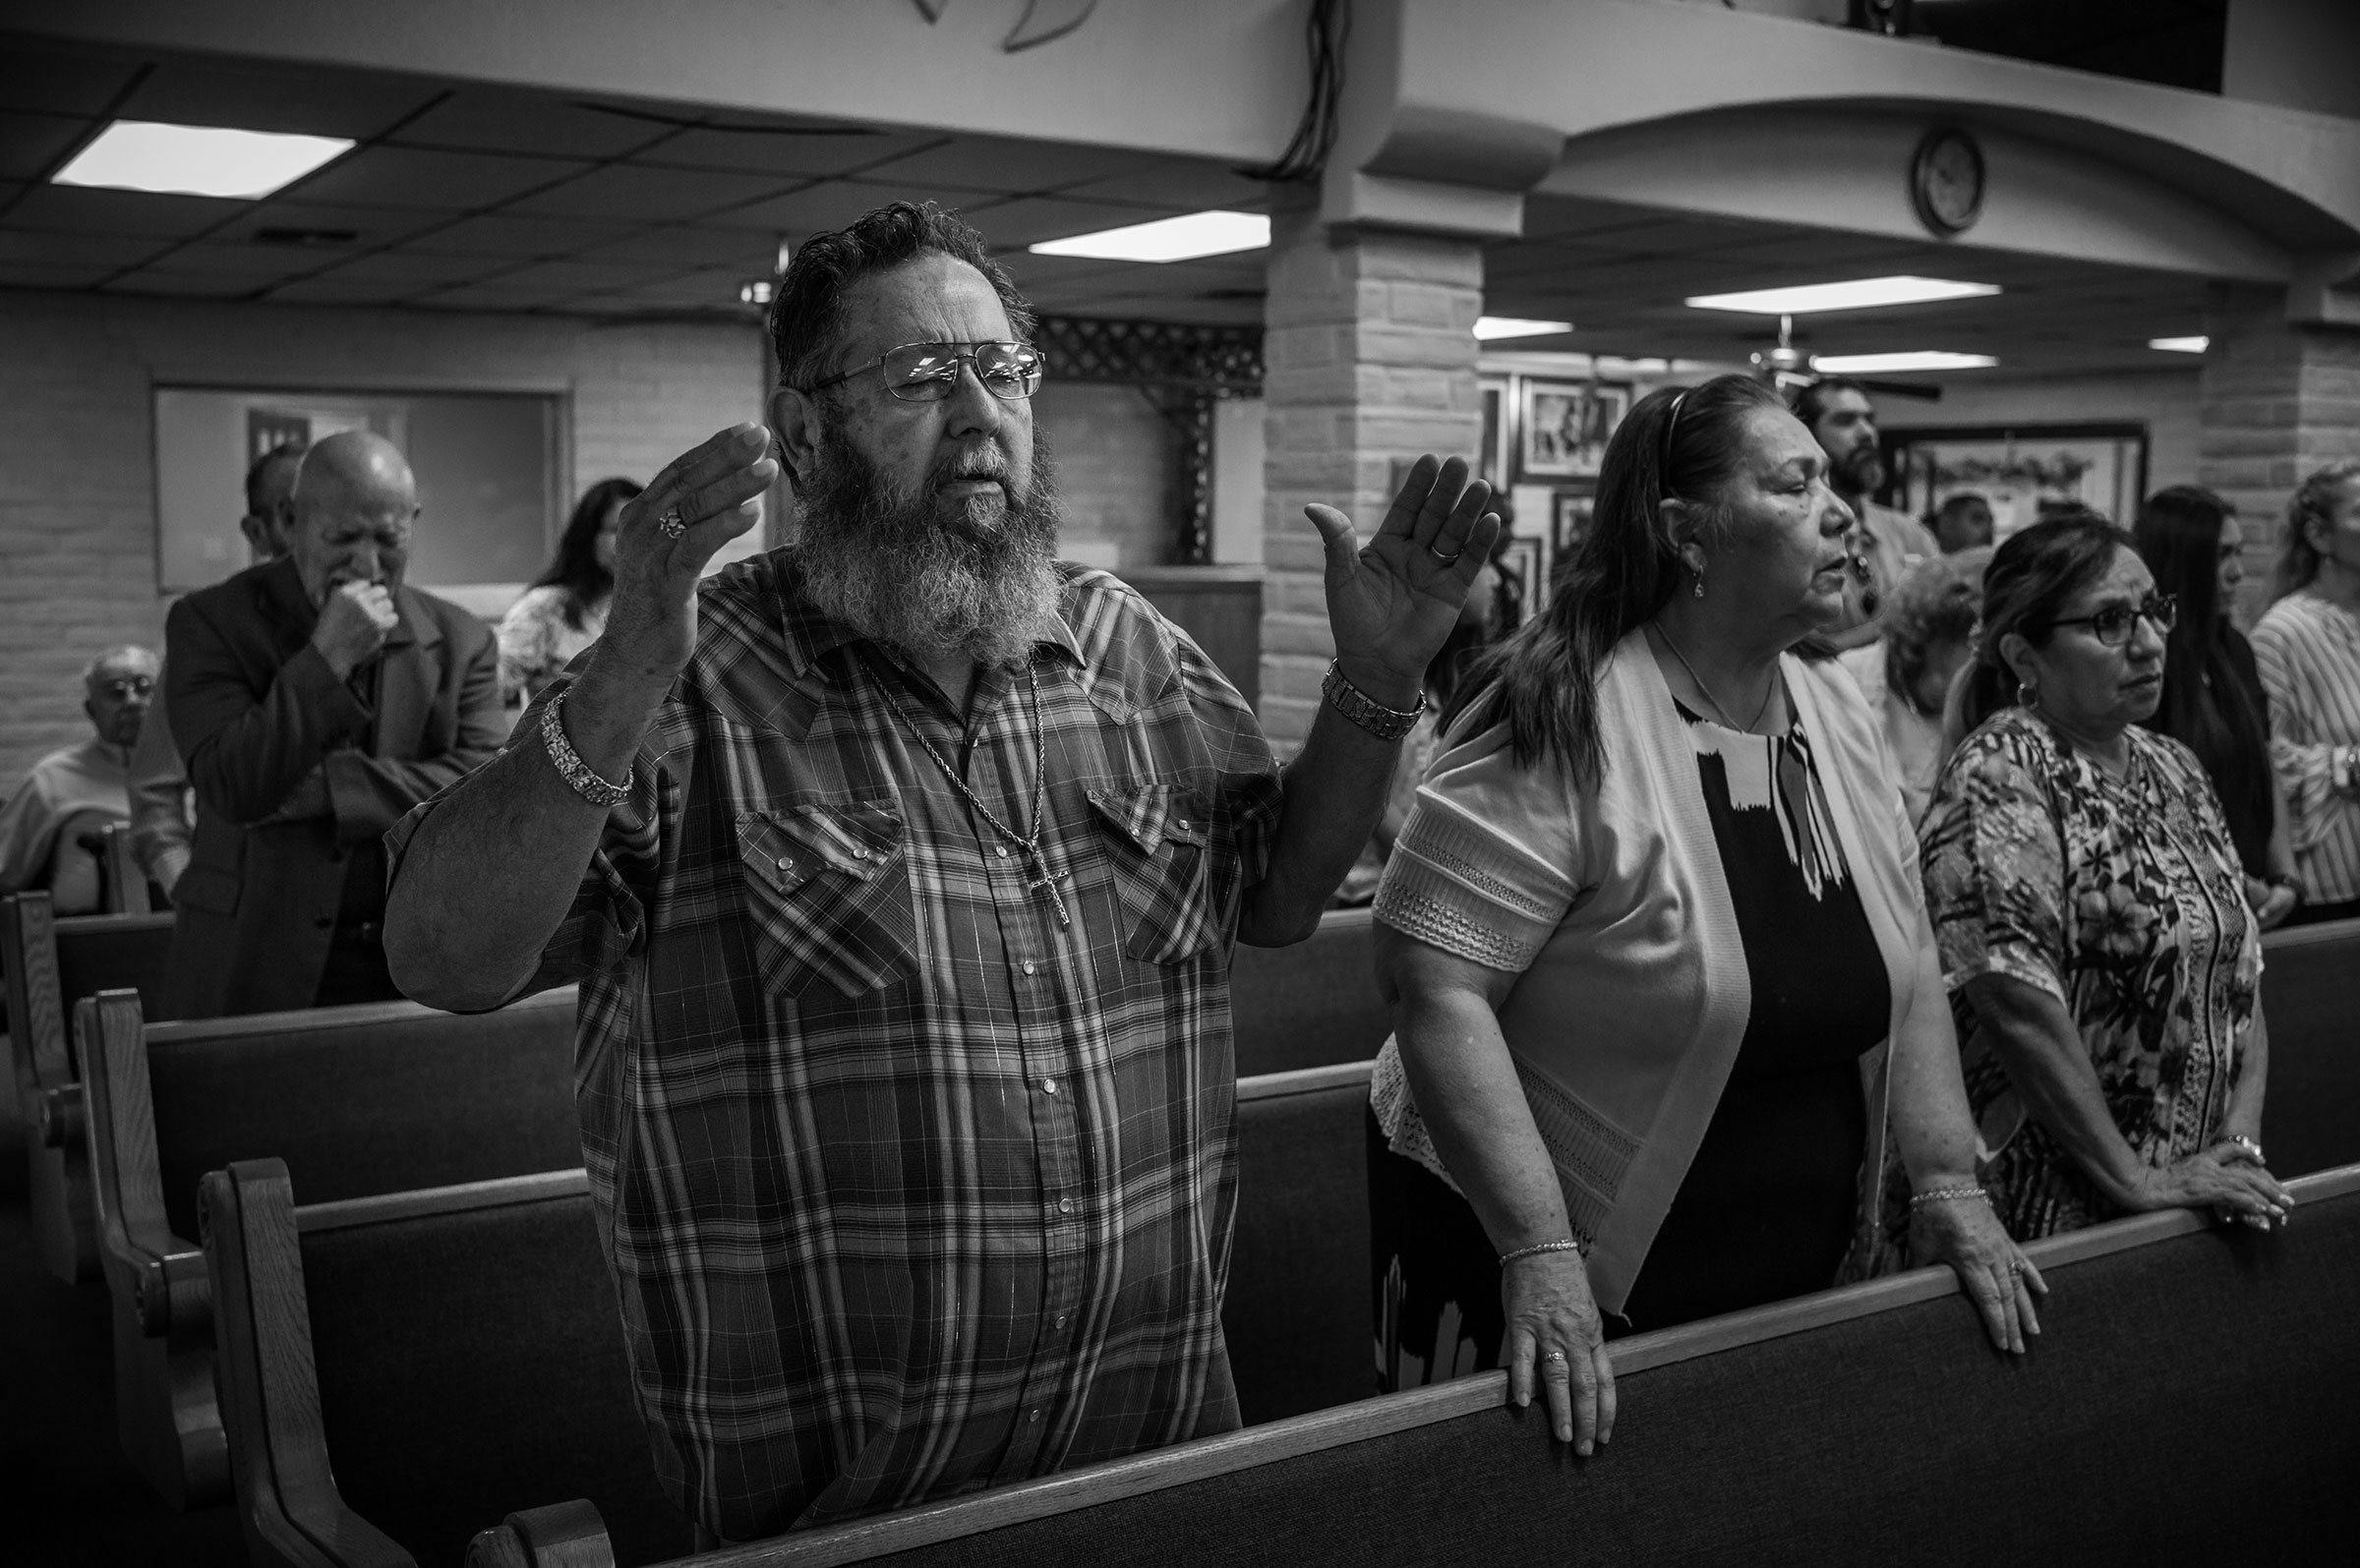 David Hernandez, left, prays with his wife Mary at the Templo Cristiano church on May 29, 2022. (David Butow for TIME)